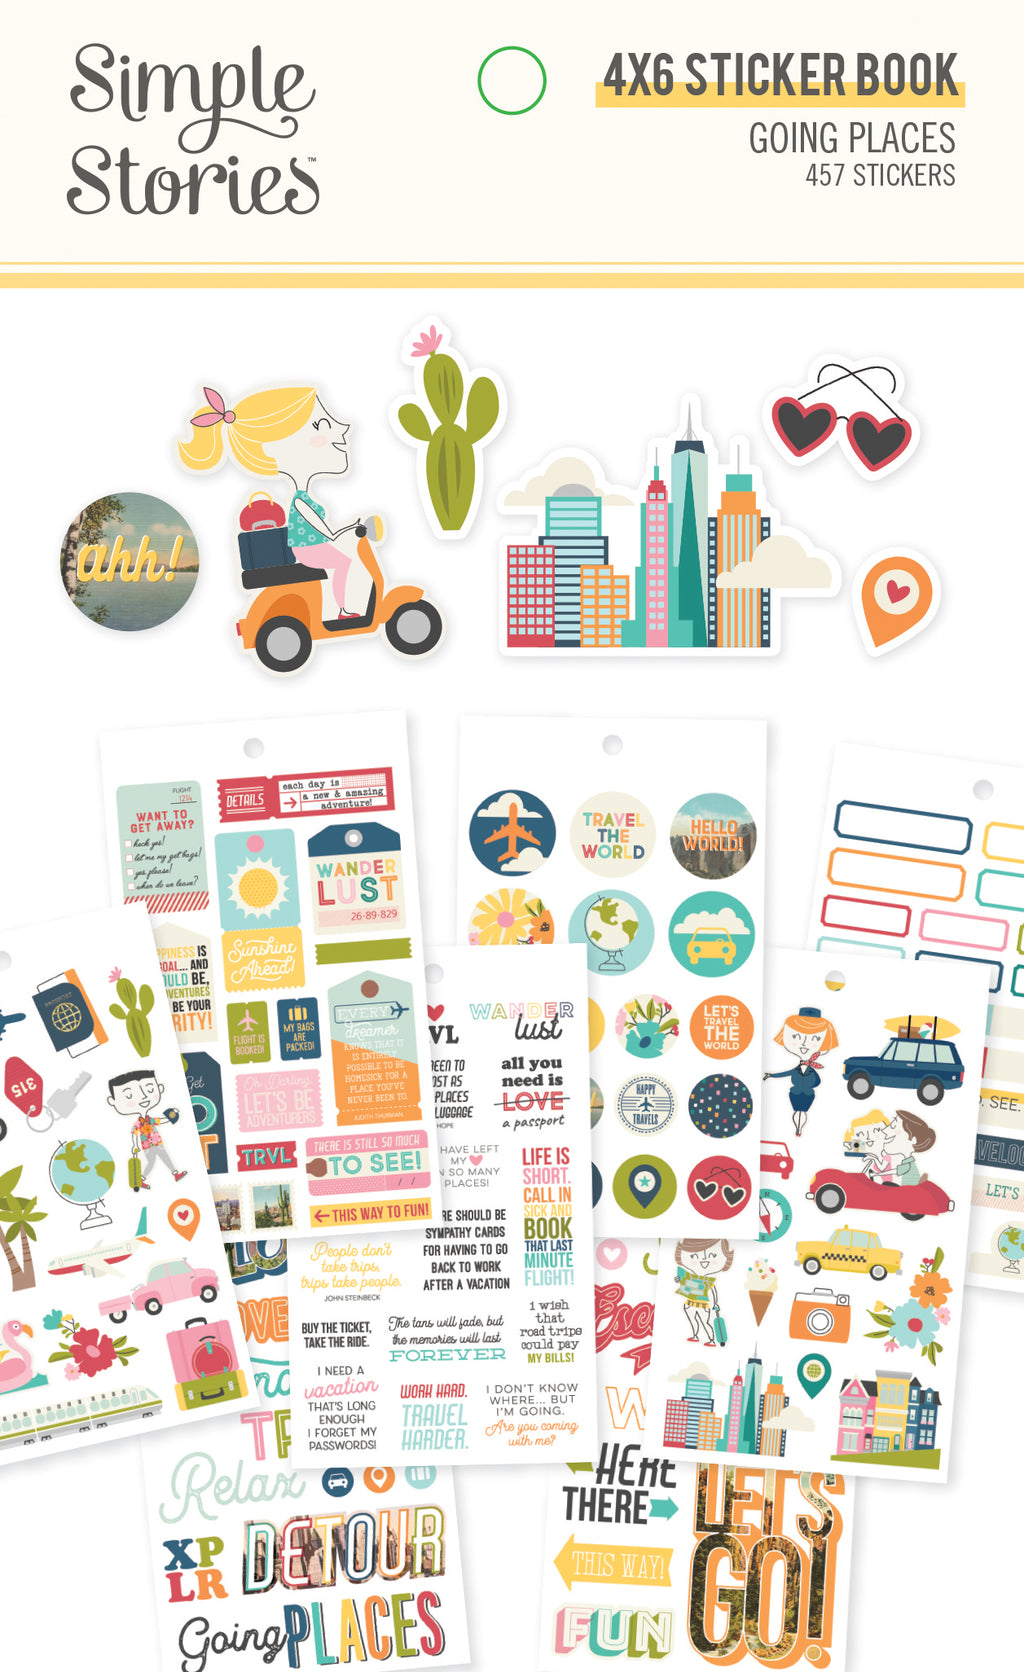 Going Places 4x6 Sticker Book